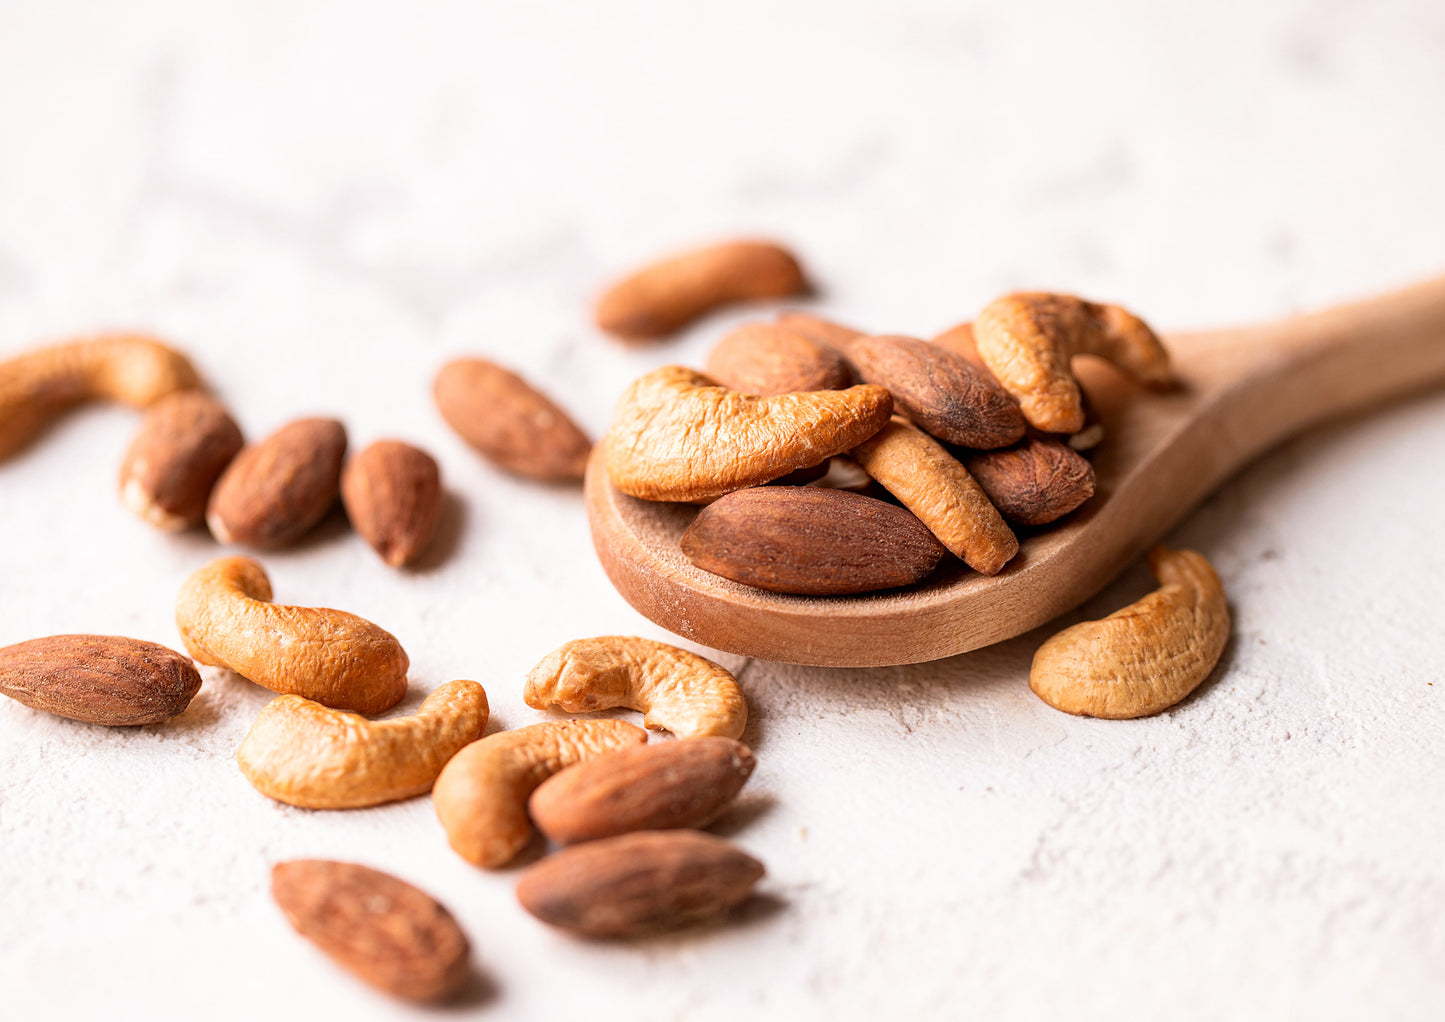 Almonds and Cashews Mix – Dry Roasted Nuts with Himalayan Salt, Protein Rich Trail Mix, Healthy Vegan Snack, No Oils and Preservatives, Good Source of Fiber. Bulk